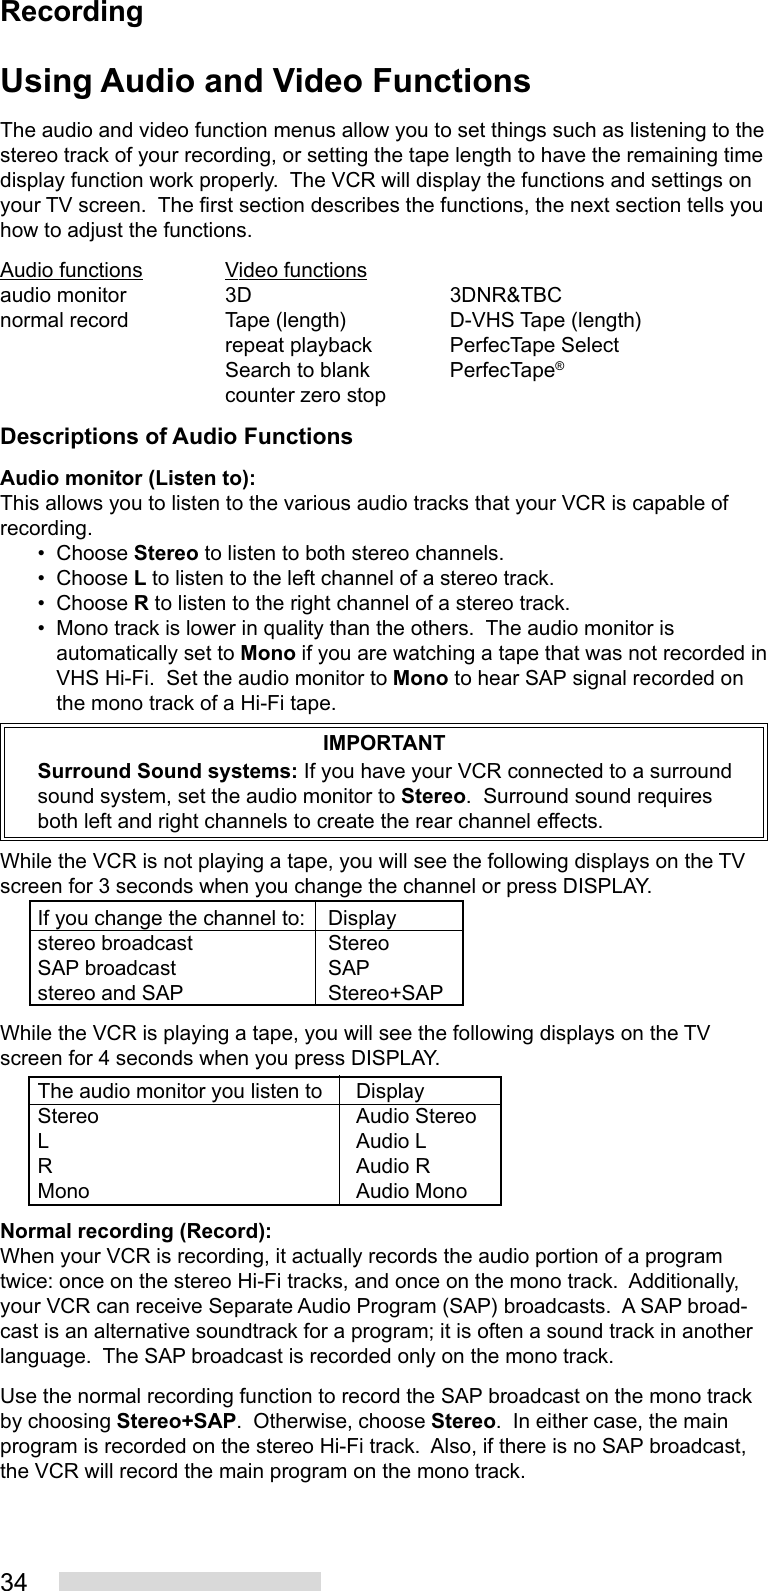 34Using Audio and Video FunctionsThe audio and video function menus allow you to set things such as listening to thestereo track of your recording, or setting the tape length to have the remaining timedisplay function work properly.  The VCR will display the functions and settings onyour TV screen.  The first section describes the functions, the next section tells youhow to adjust the functions.Audio functions Video functionsaudio monitor 3D 3DNR&amp;TBCnormal record Tape (length) D-VHS Tape (length)repeat playback PerfecTape SelectSearch to blank PerfecTape®counter zero stopDescriptions of Audio FunctionsAudio monitor (Listen to):This allows you to listen to the various audio tracks that your VCR is capable ofrecording.• Choose Stereo to listen to both stereo channels.• Choose L to listen to the left channel of a stereo track.• Choose R to listen to the right channel of a stereo track.• Mono track is lower in quality than the others.  The audio monitor isautomatically set to Mono if you are watching a tape that was not recorded inVHS Hi-Fi.  Set the audio monitor to Mono to hear SAP signal recorded onthe mono track of a Hi-Fi tape.IMPORTANTSurround Sound systems: If you have your VCR connected to a surroundsound system, set the audio monitor to Stereo.  Surround sound requiresboth left and right channels to create the rear channel effects.While the VCR is not playing a tape, you will see the following displays on the TVscreen for 3 seconds when you change the channel or press DISPLAY.If you change the channel to: Displaystereo broadcast StereoSAP broadcast SAPstereo and SAP Stereo+SAPWhile the VCR is playing a tape, you will see the following displays on the TVscreen for 4 seconds when you press DISPLAY.The audio monitor you listen to DisplayStereo Audio StereoL Audio LR Audio RMono Audio MonoNormal recording (Record):When your VCR is recording, it actually records the audio portion of a programtwice: once on the stereo Hi-Fi tracks, and once on the mono track.  Additionally,your VCR can receive Separate Audio Program (SAP) broadcasts.  A SAP broad-cast is an alternative soundtrack for a program; it is often a sound track in anotherlanguage.  The SAP broadcast is recorded only on the mono track.Use the normal recording function to record the SAP broadcast on the mono trackby choosing Stereo+SAP.  Otherwise, choose Stereo.  In either case, the mainprogram is recorded on the stereo Hi-Fi track.  Also, if there is no SAP broadcast,the VCR will record the main program on the mono track.Recording